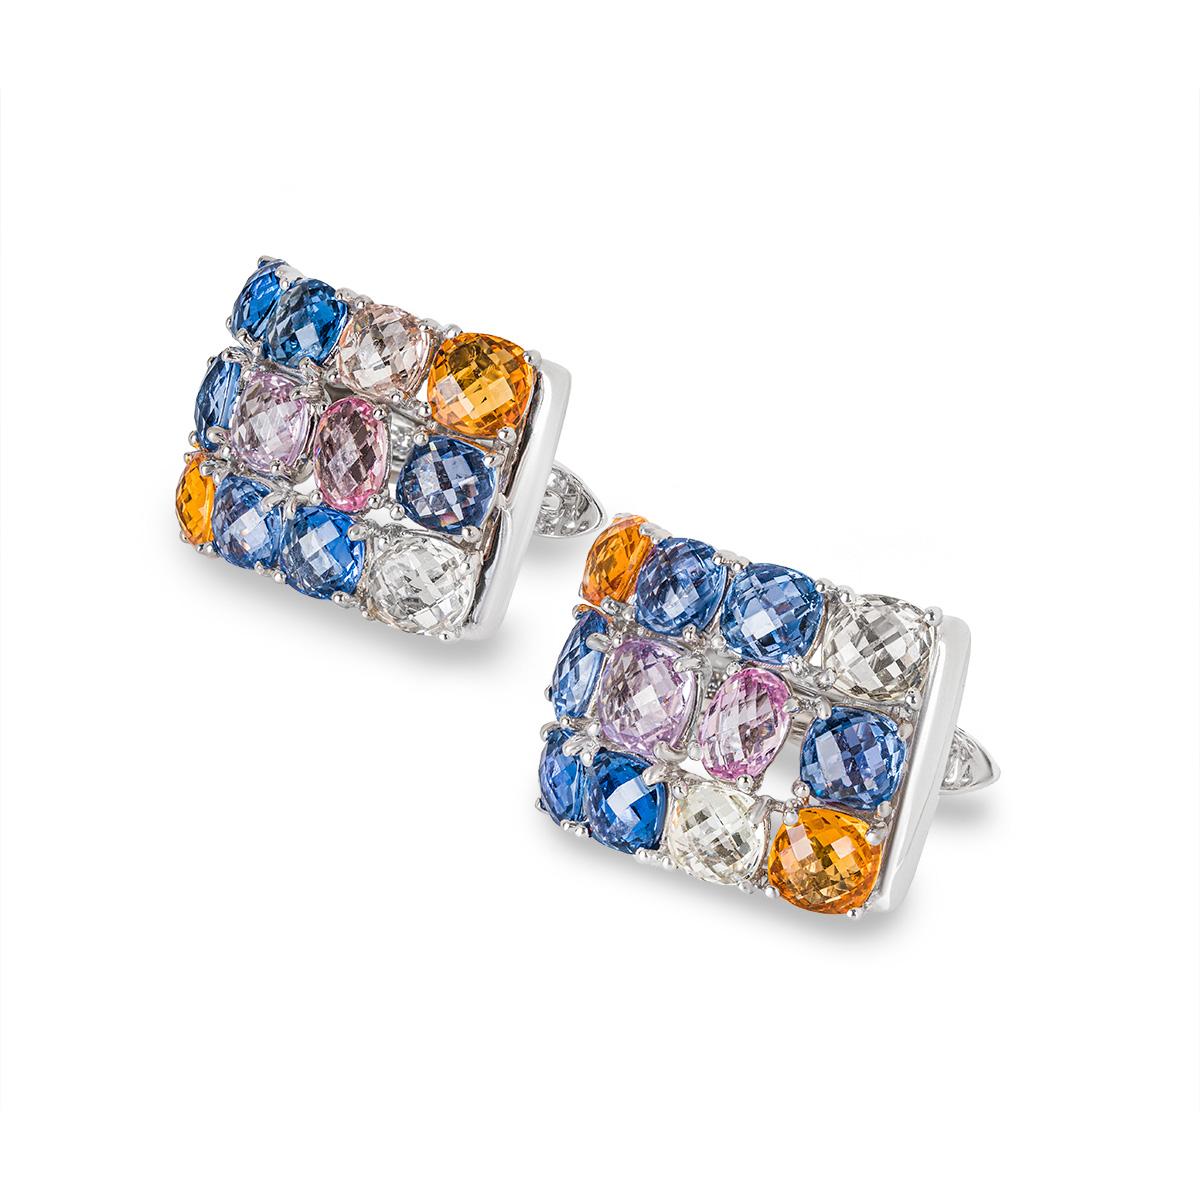 Large 18k White Gold Earrings set with a Mix of 24 Coloured Sapphires of 17.51ct Total. Earring Width 1.7cm, Length 2.1cm. This comes with a box and our own Certificate of Authenticity.